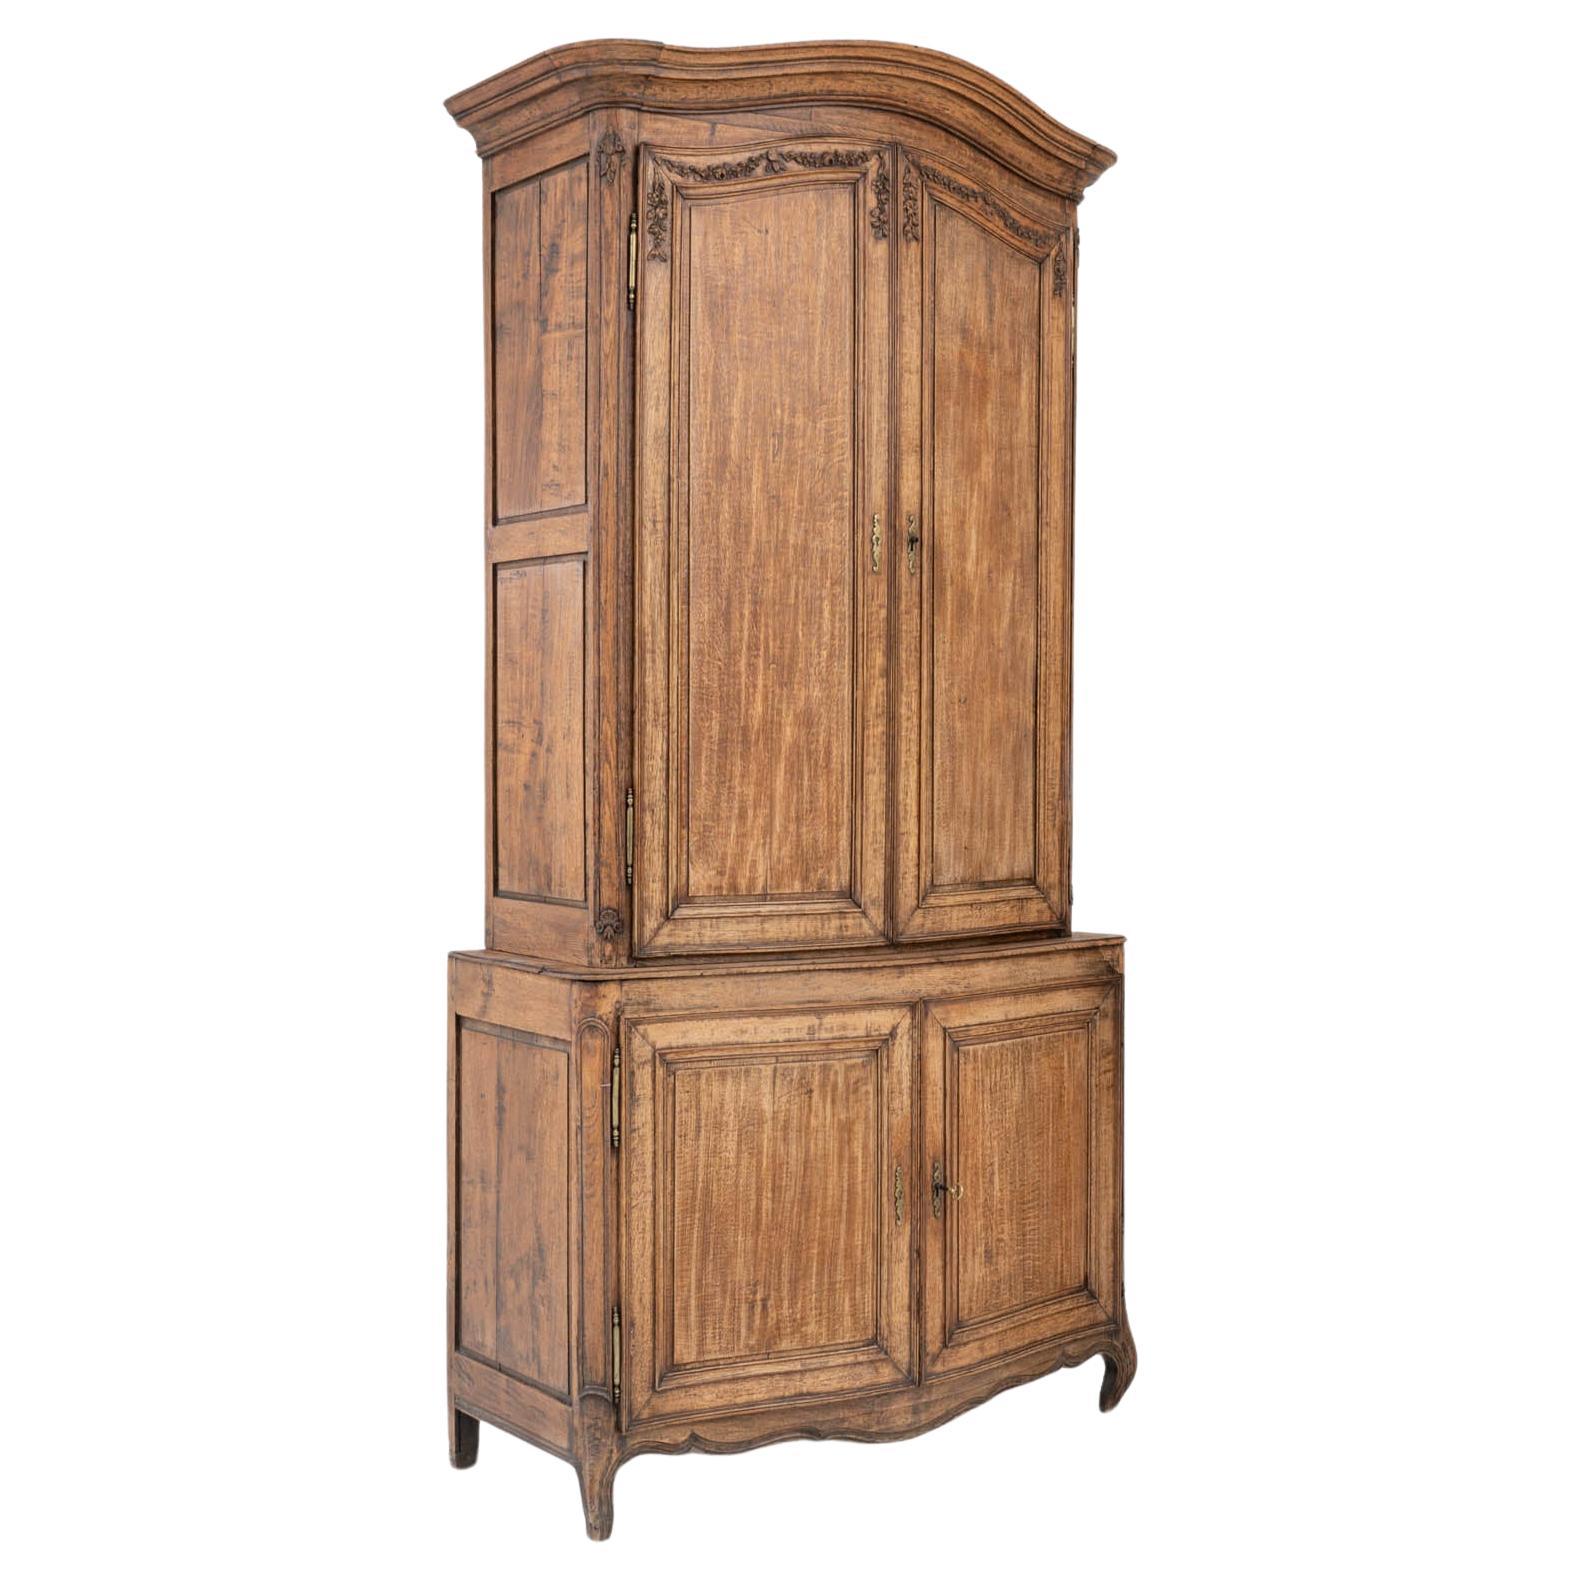 Early 19th Century French Wooden Cabinet For Sale